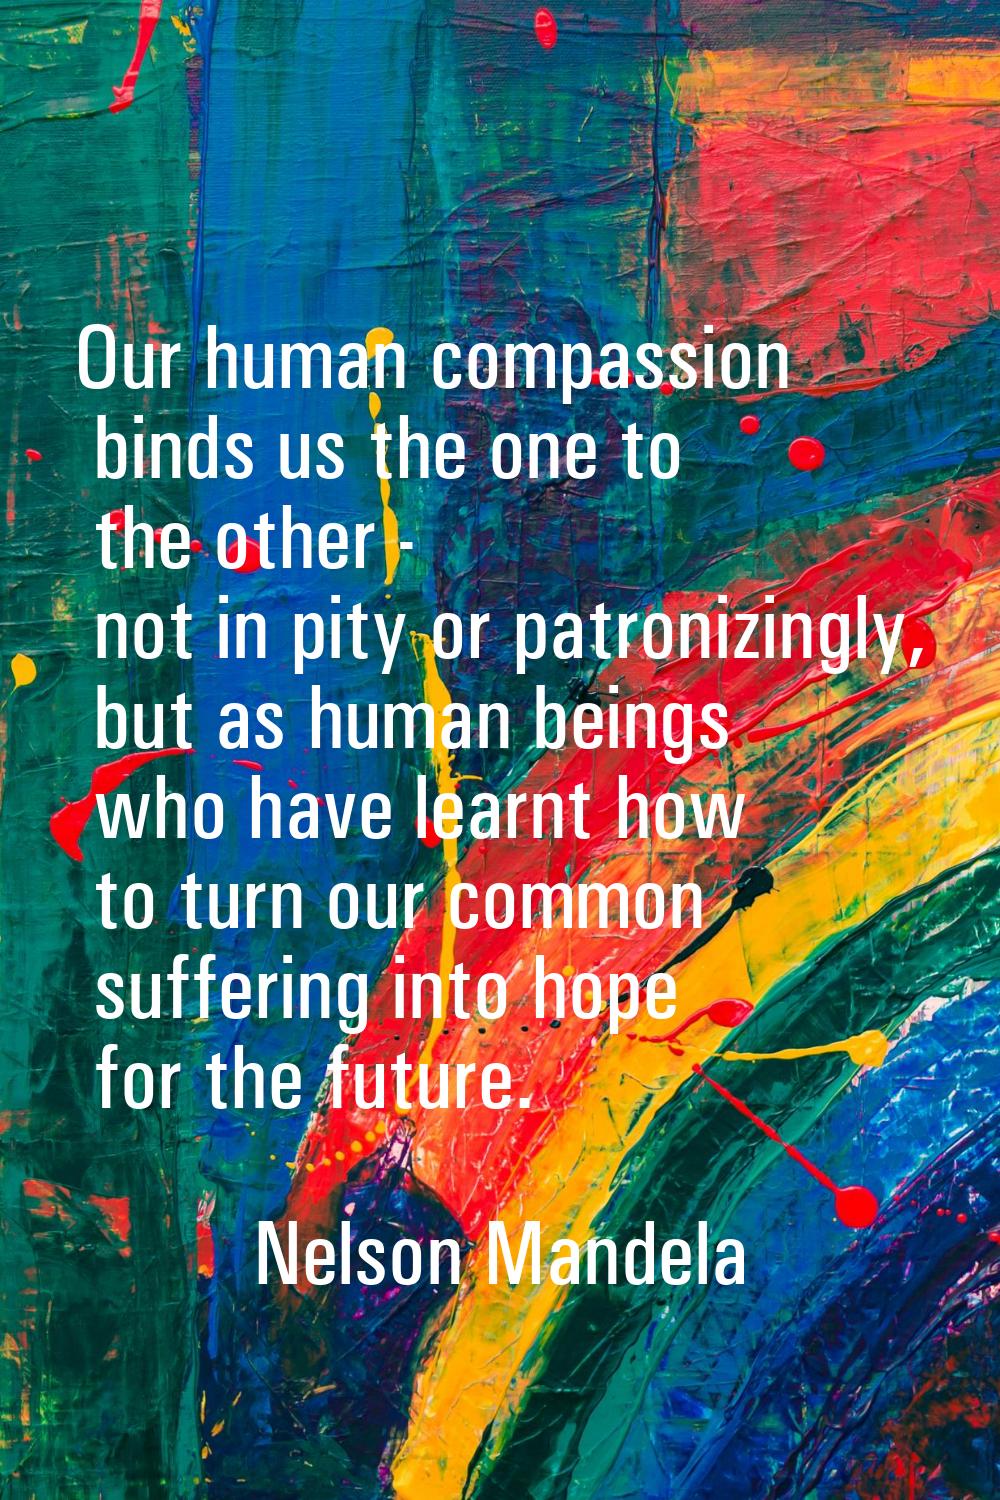 Our human compassion binds us the one to the other - not in pity or patronizingly, but as human bei